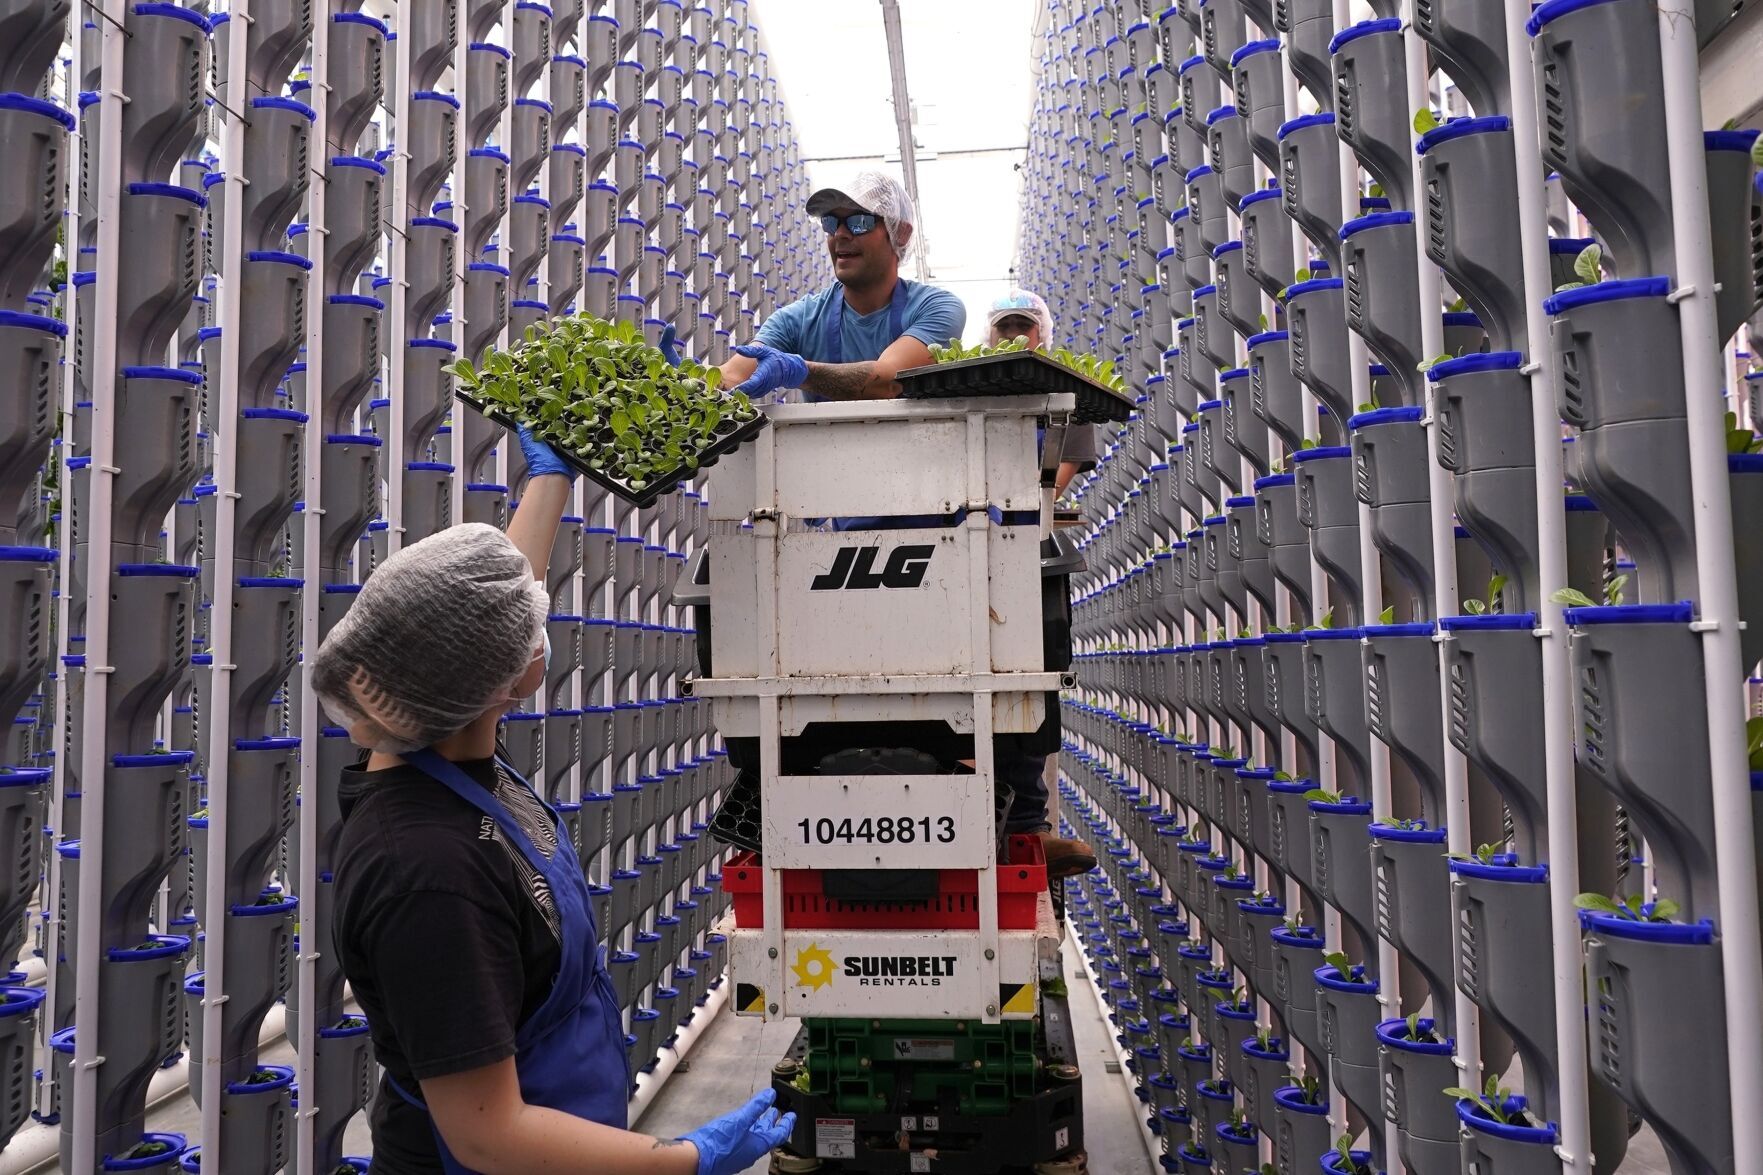 Indoor farming on the rise while some operations fail